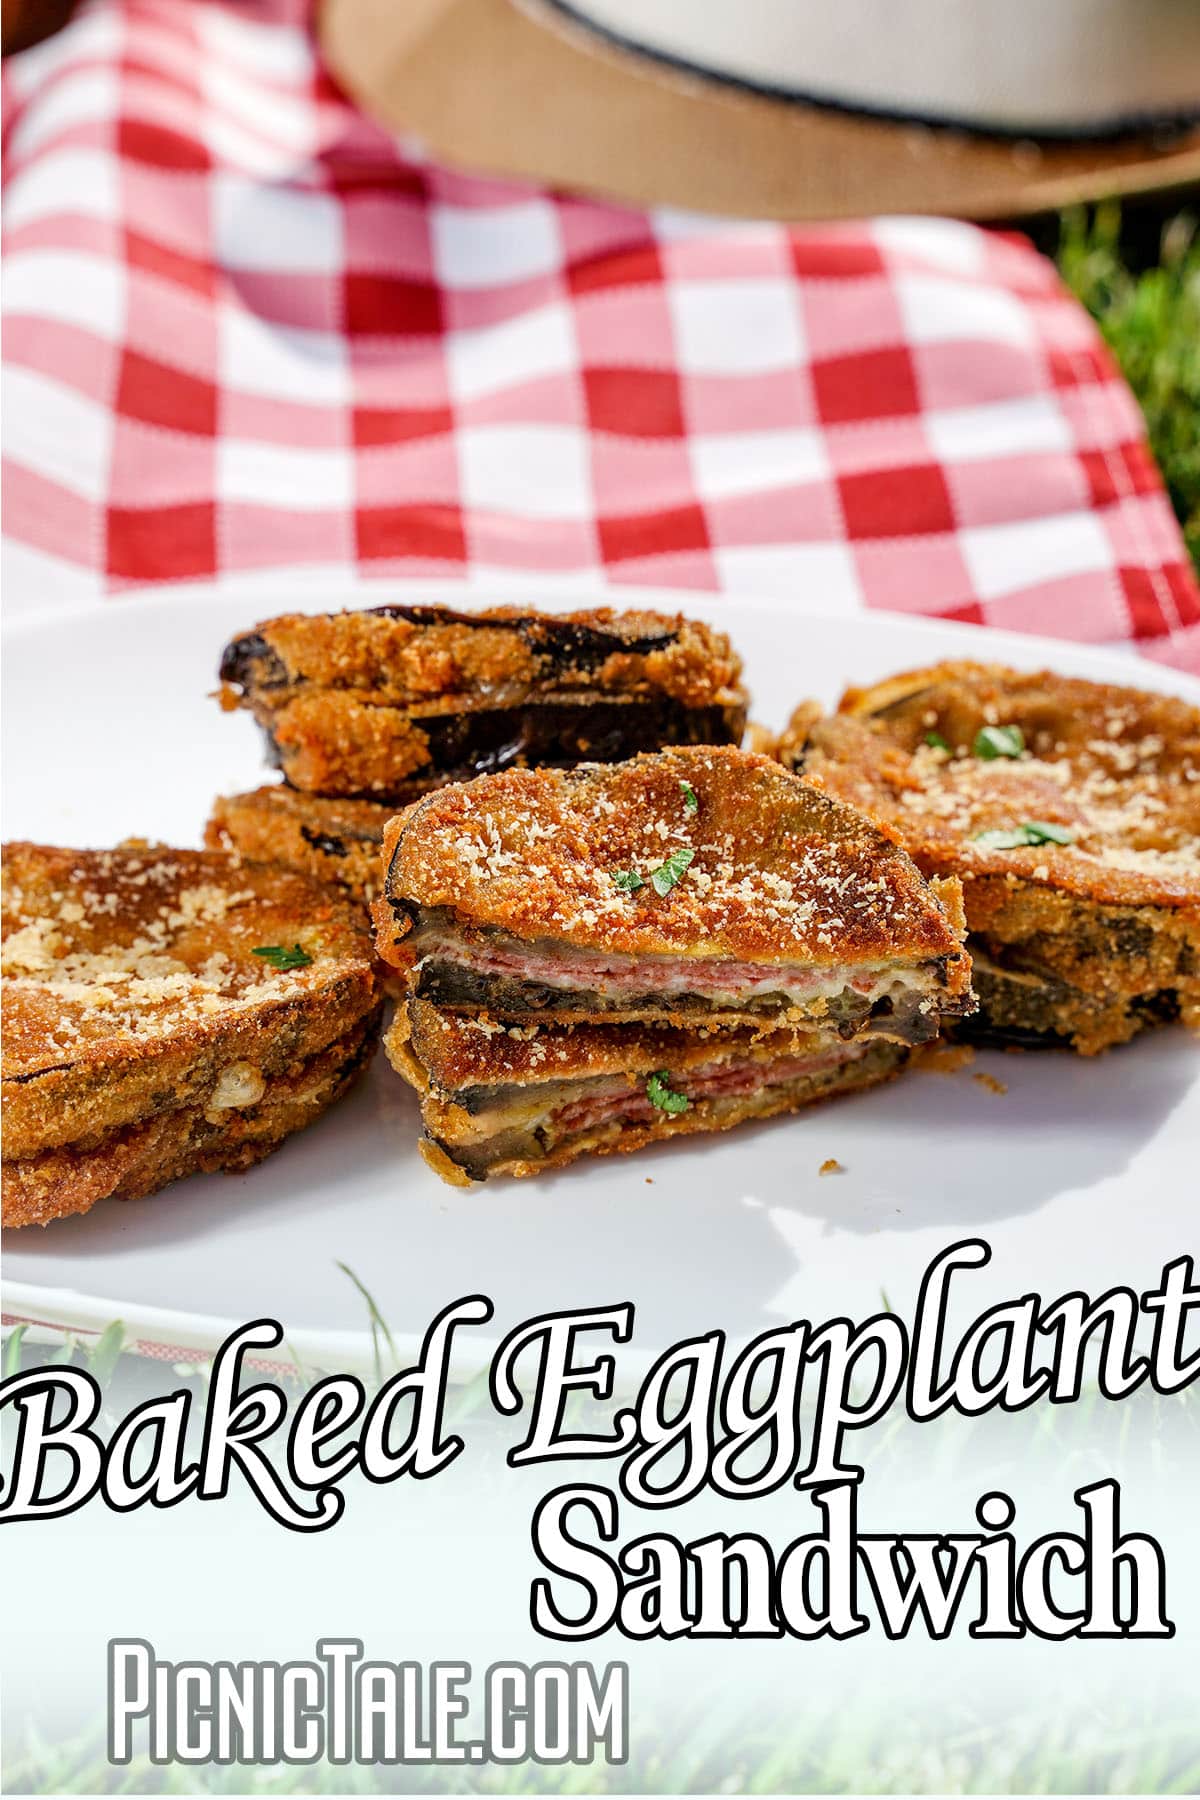 easy sandwiches made with egglplant with text which reads Baked Eggplant Sandwich